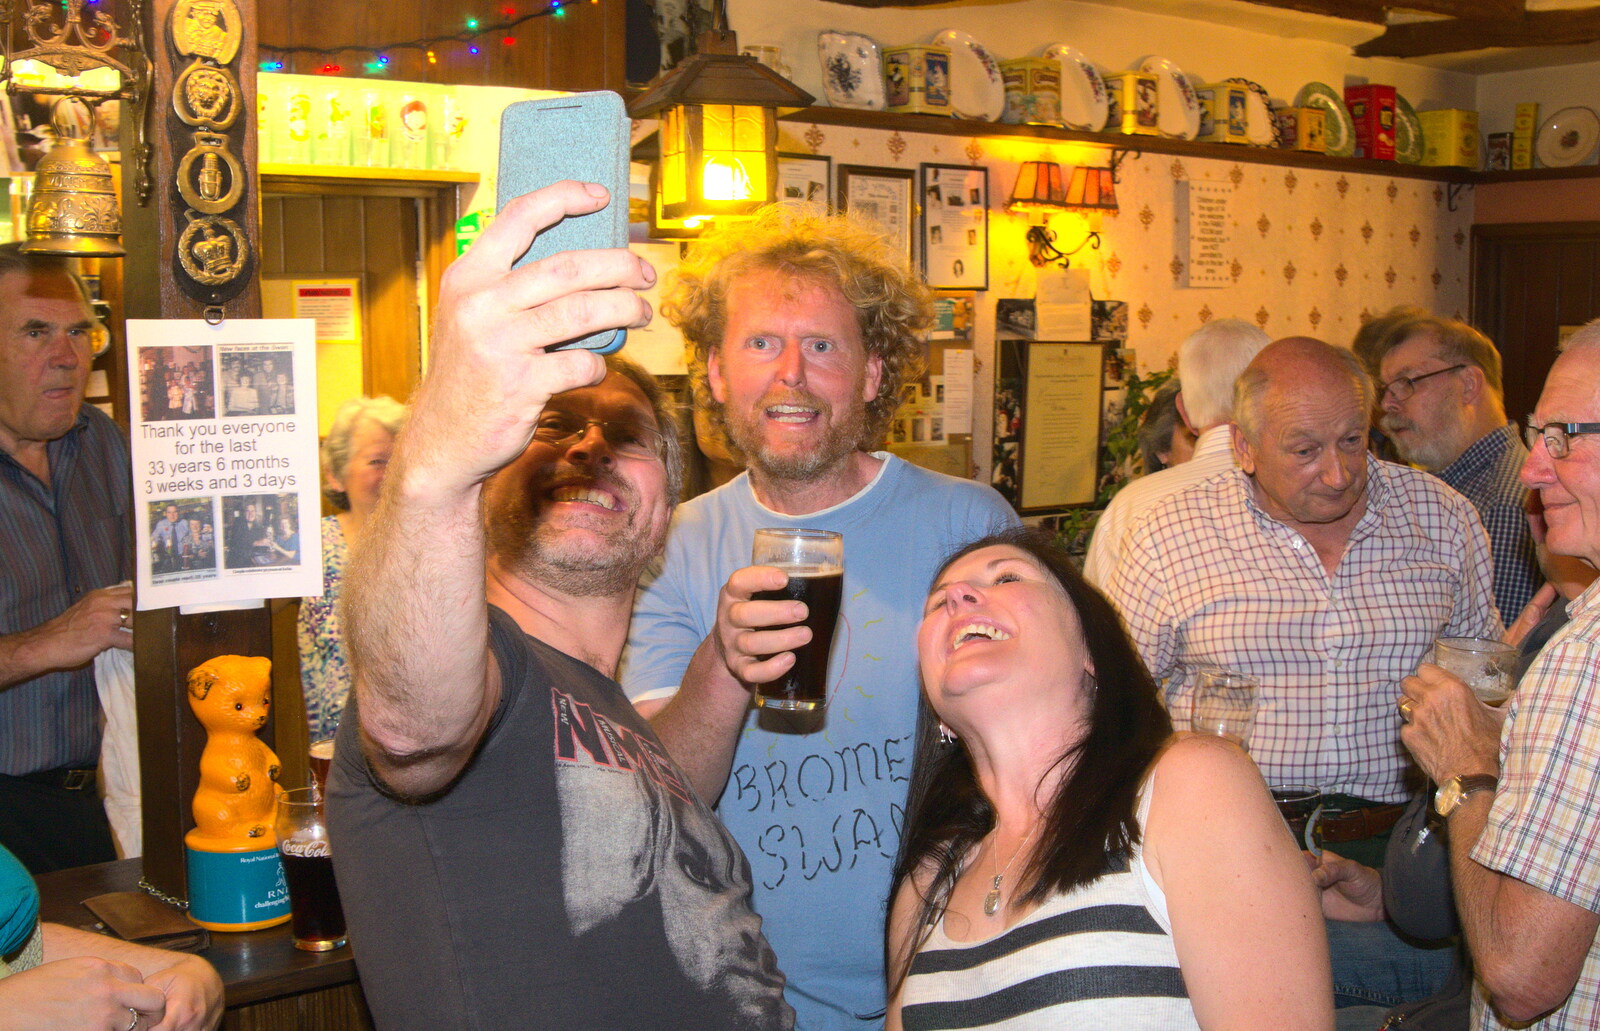 Another selfie with Wavy and Rachel from A Retirement: The Last Night of The Swan Inn, Brome, Suffolk - 3rd June 2017